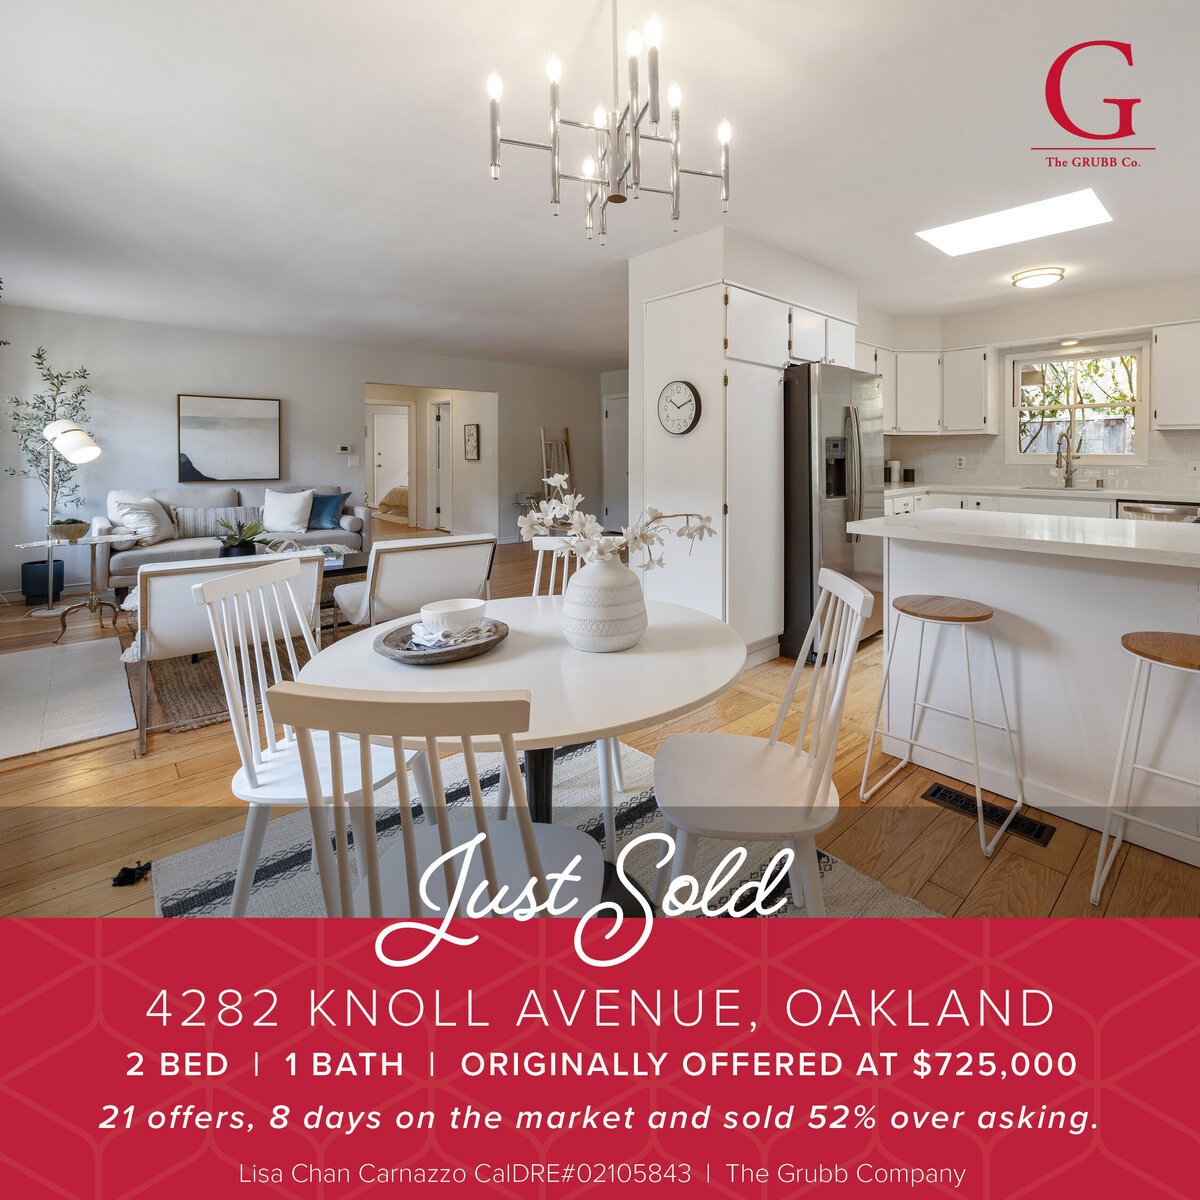 *Just Sold - 4282 Knoll Avenue, Oakland LC3